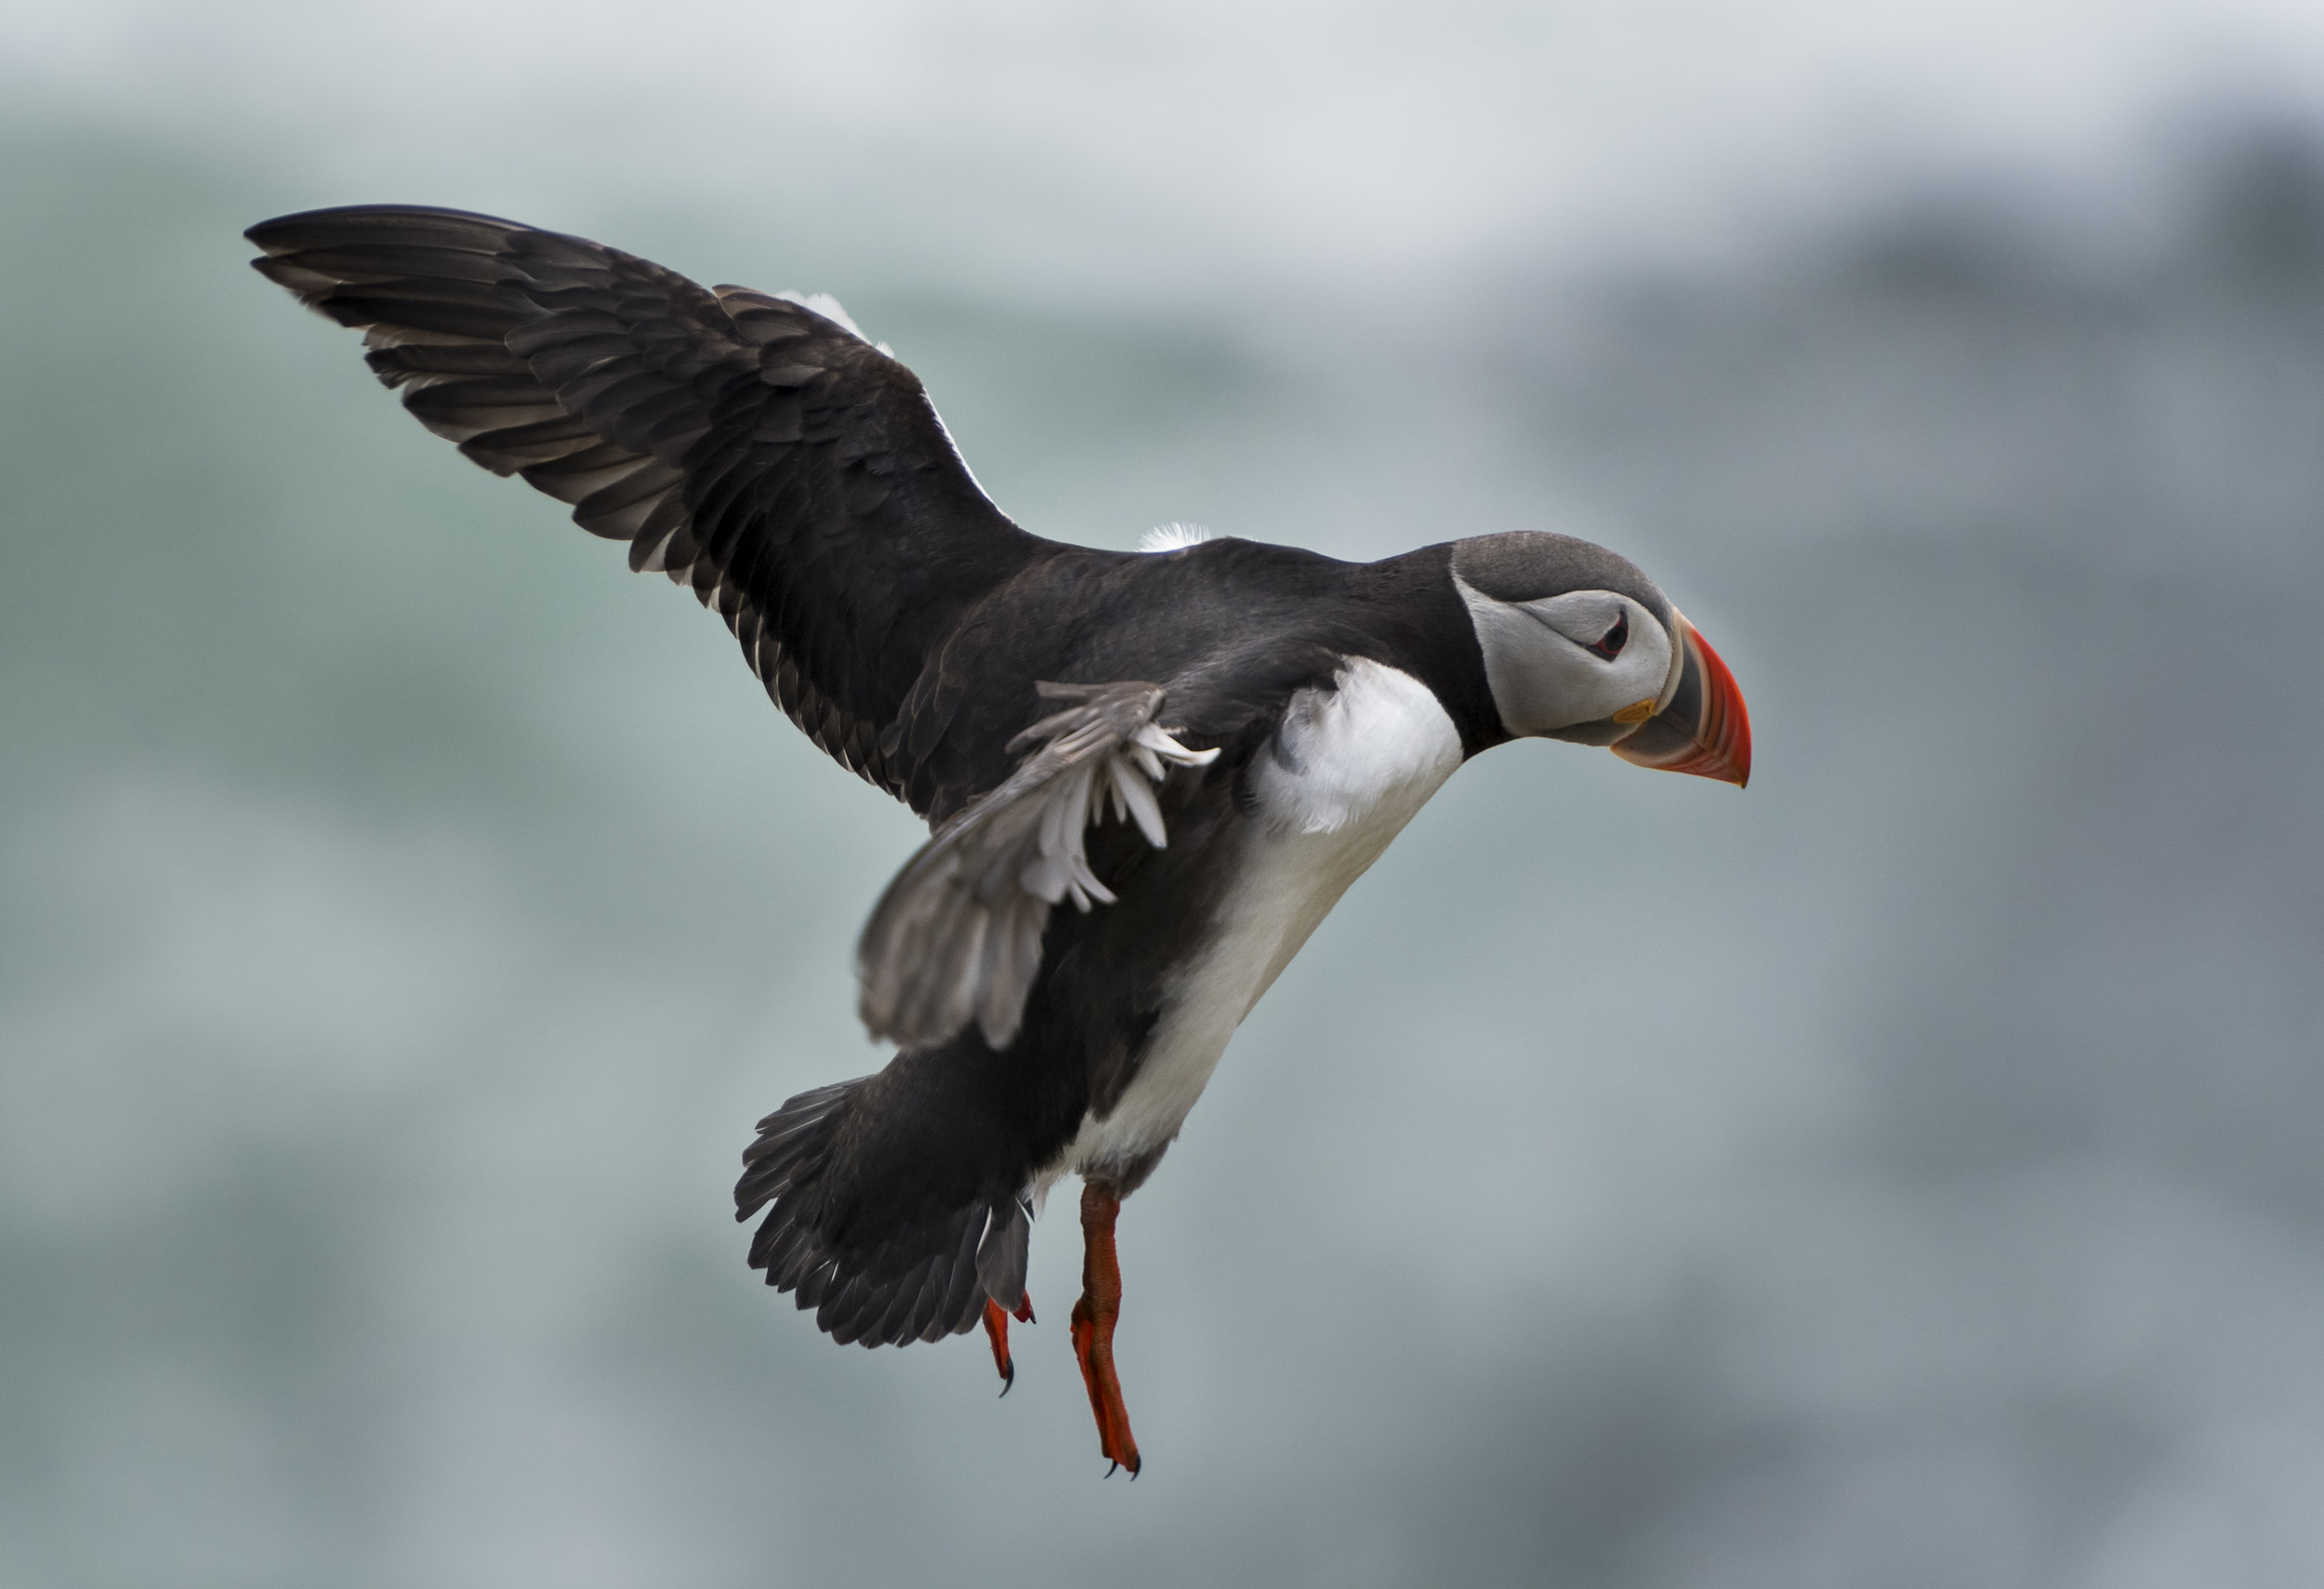 Puffin IV